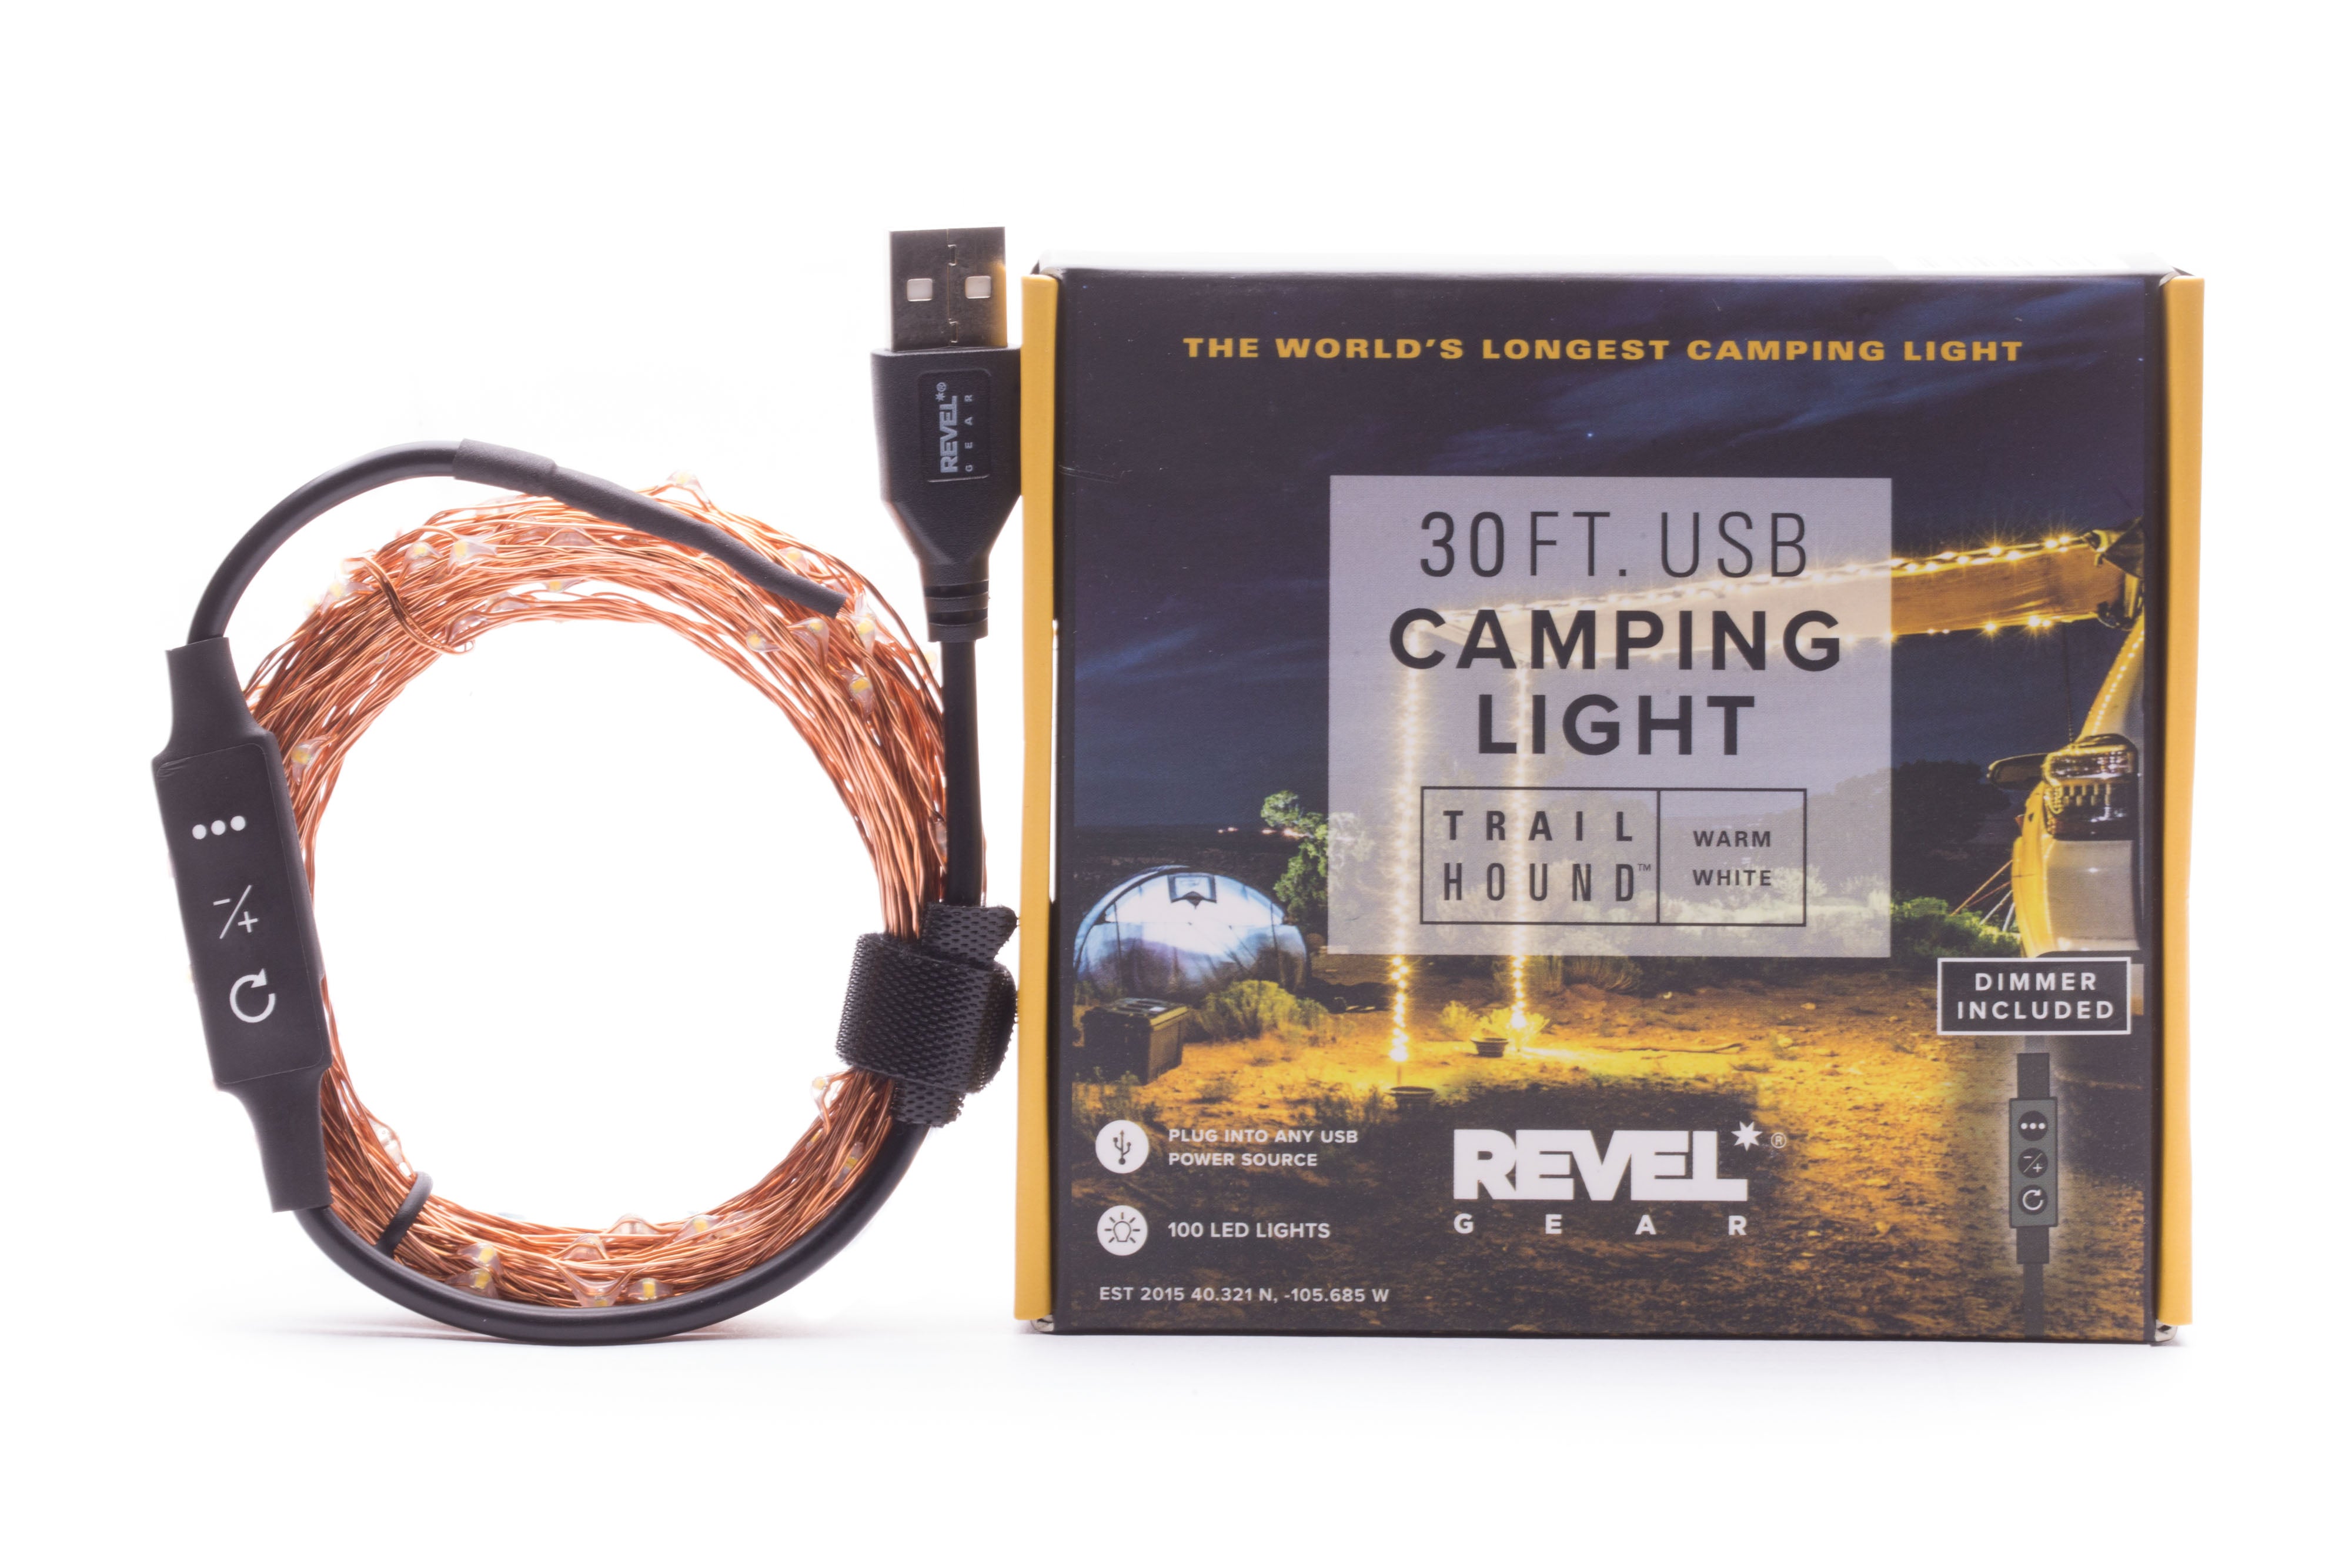 Revel Gear Trail Hound 30ft Camping Light Soft (warm) White with Dimmer